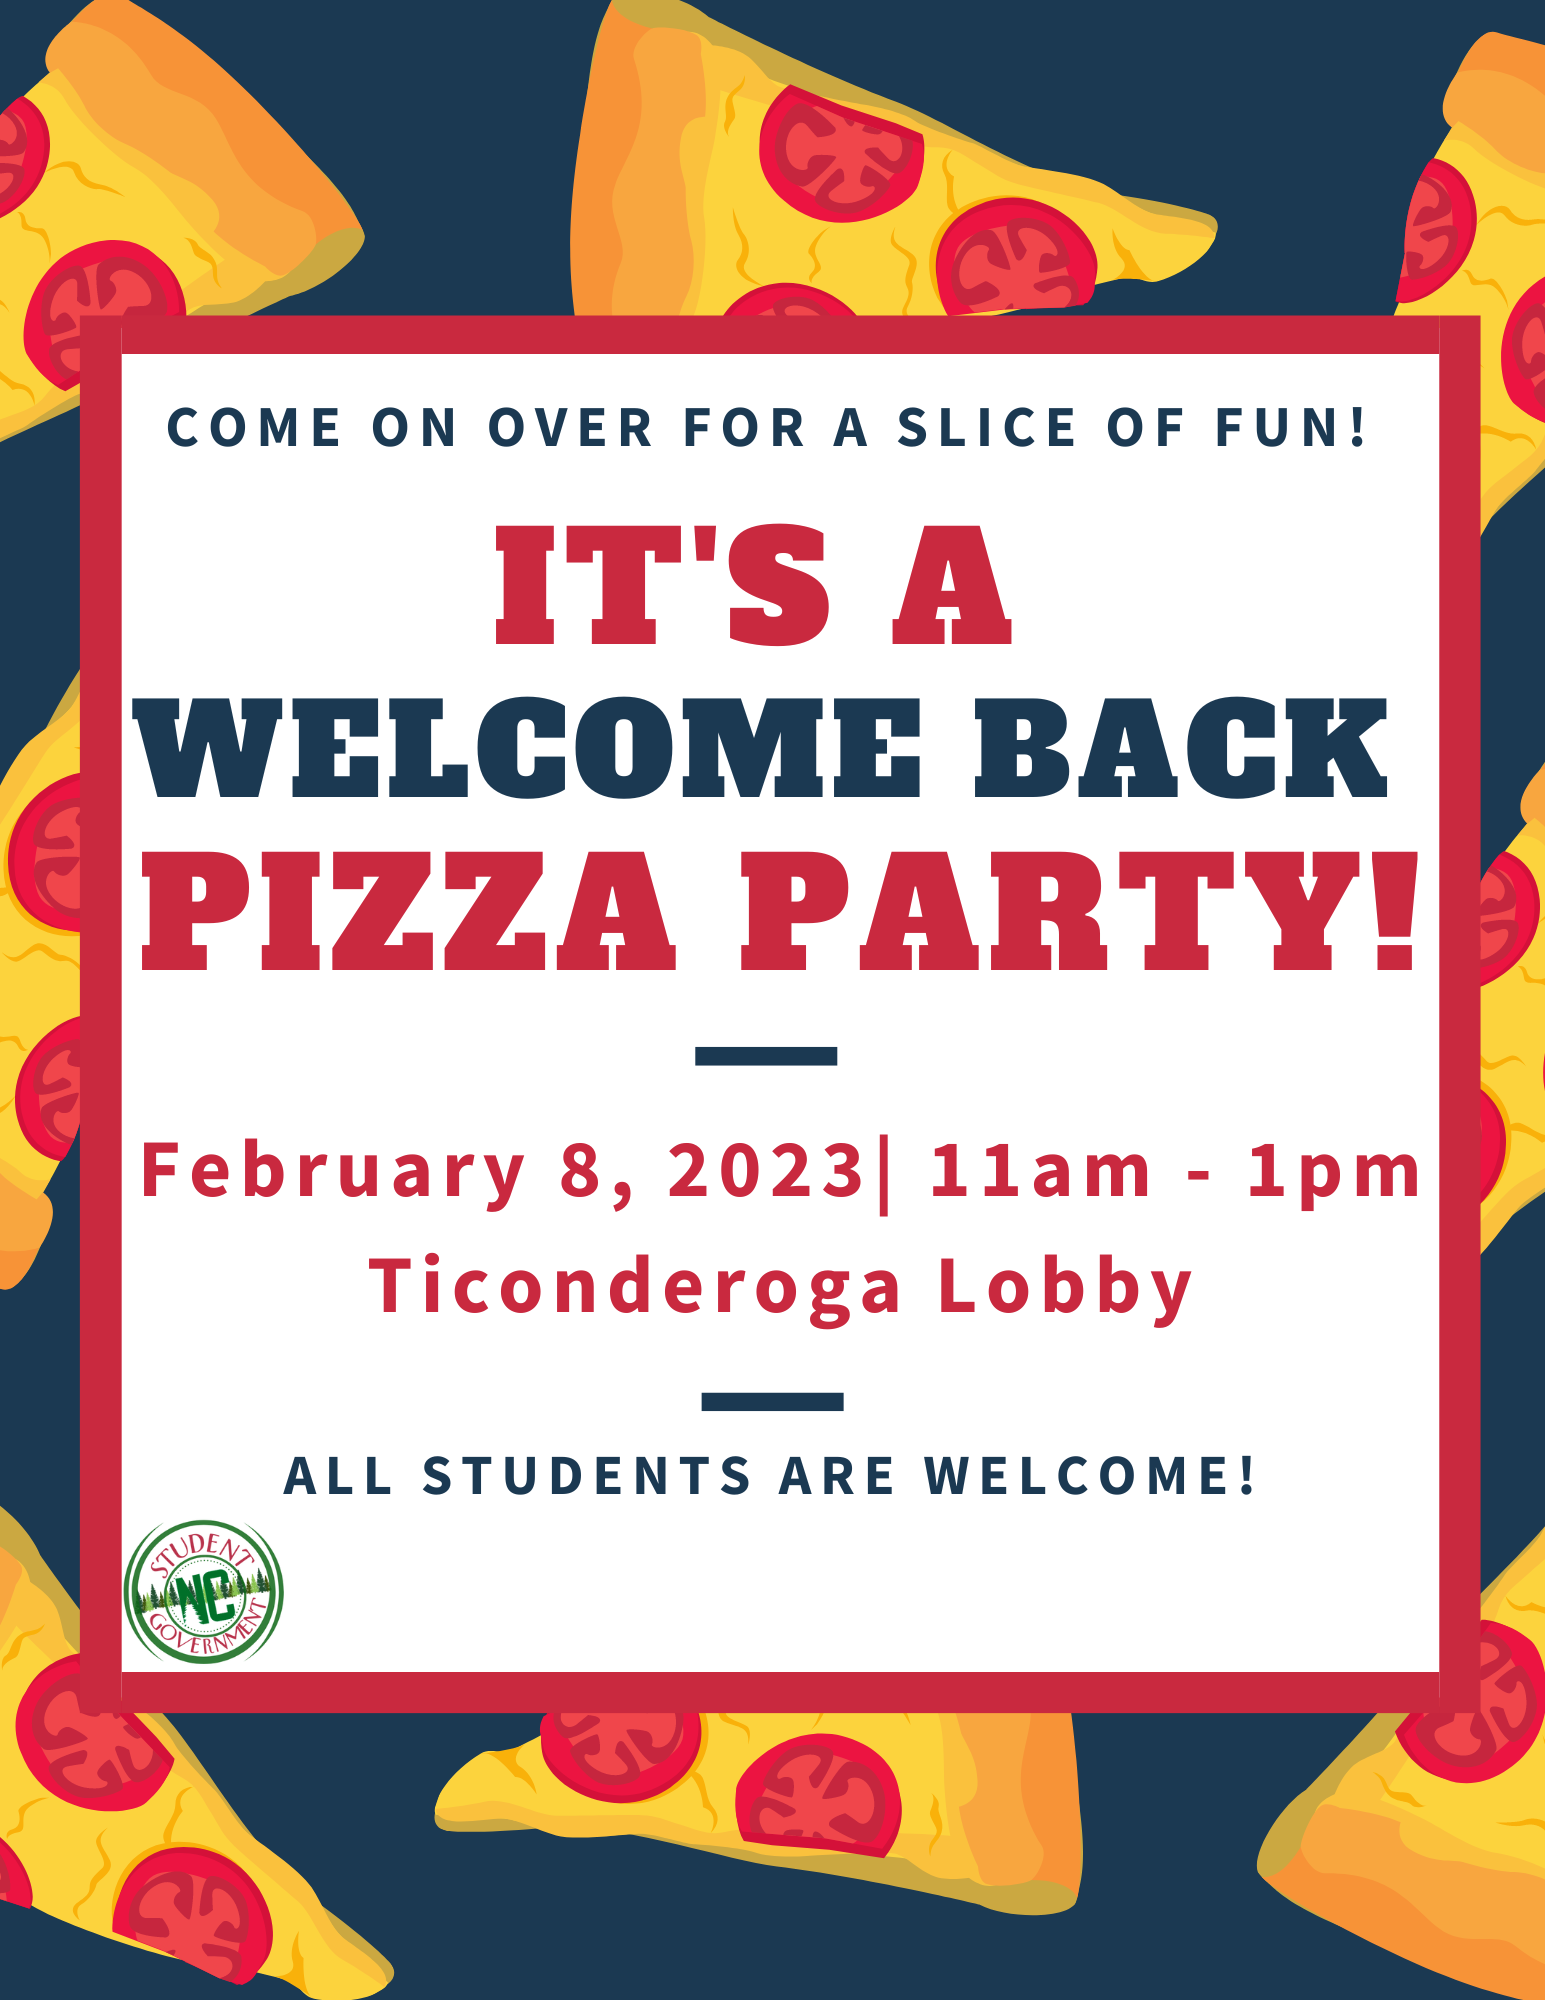 Ti Campus Spring - Welcome Pizza Party